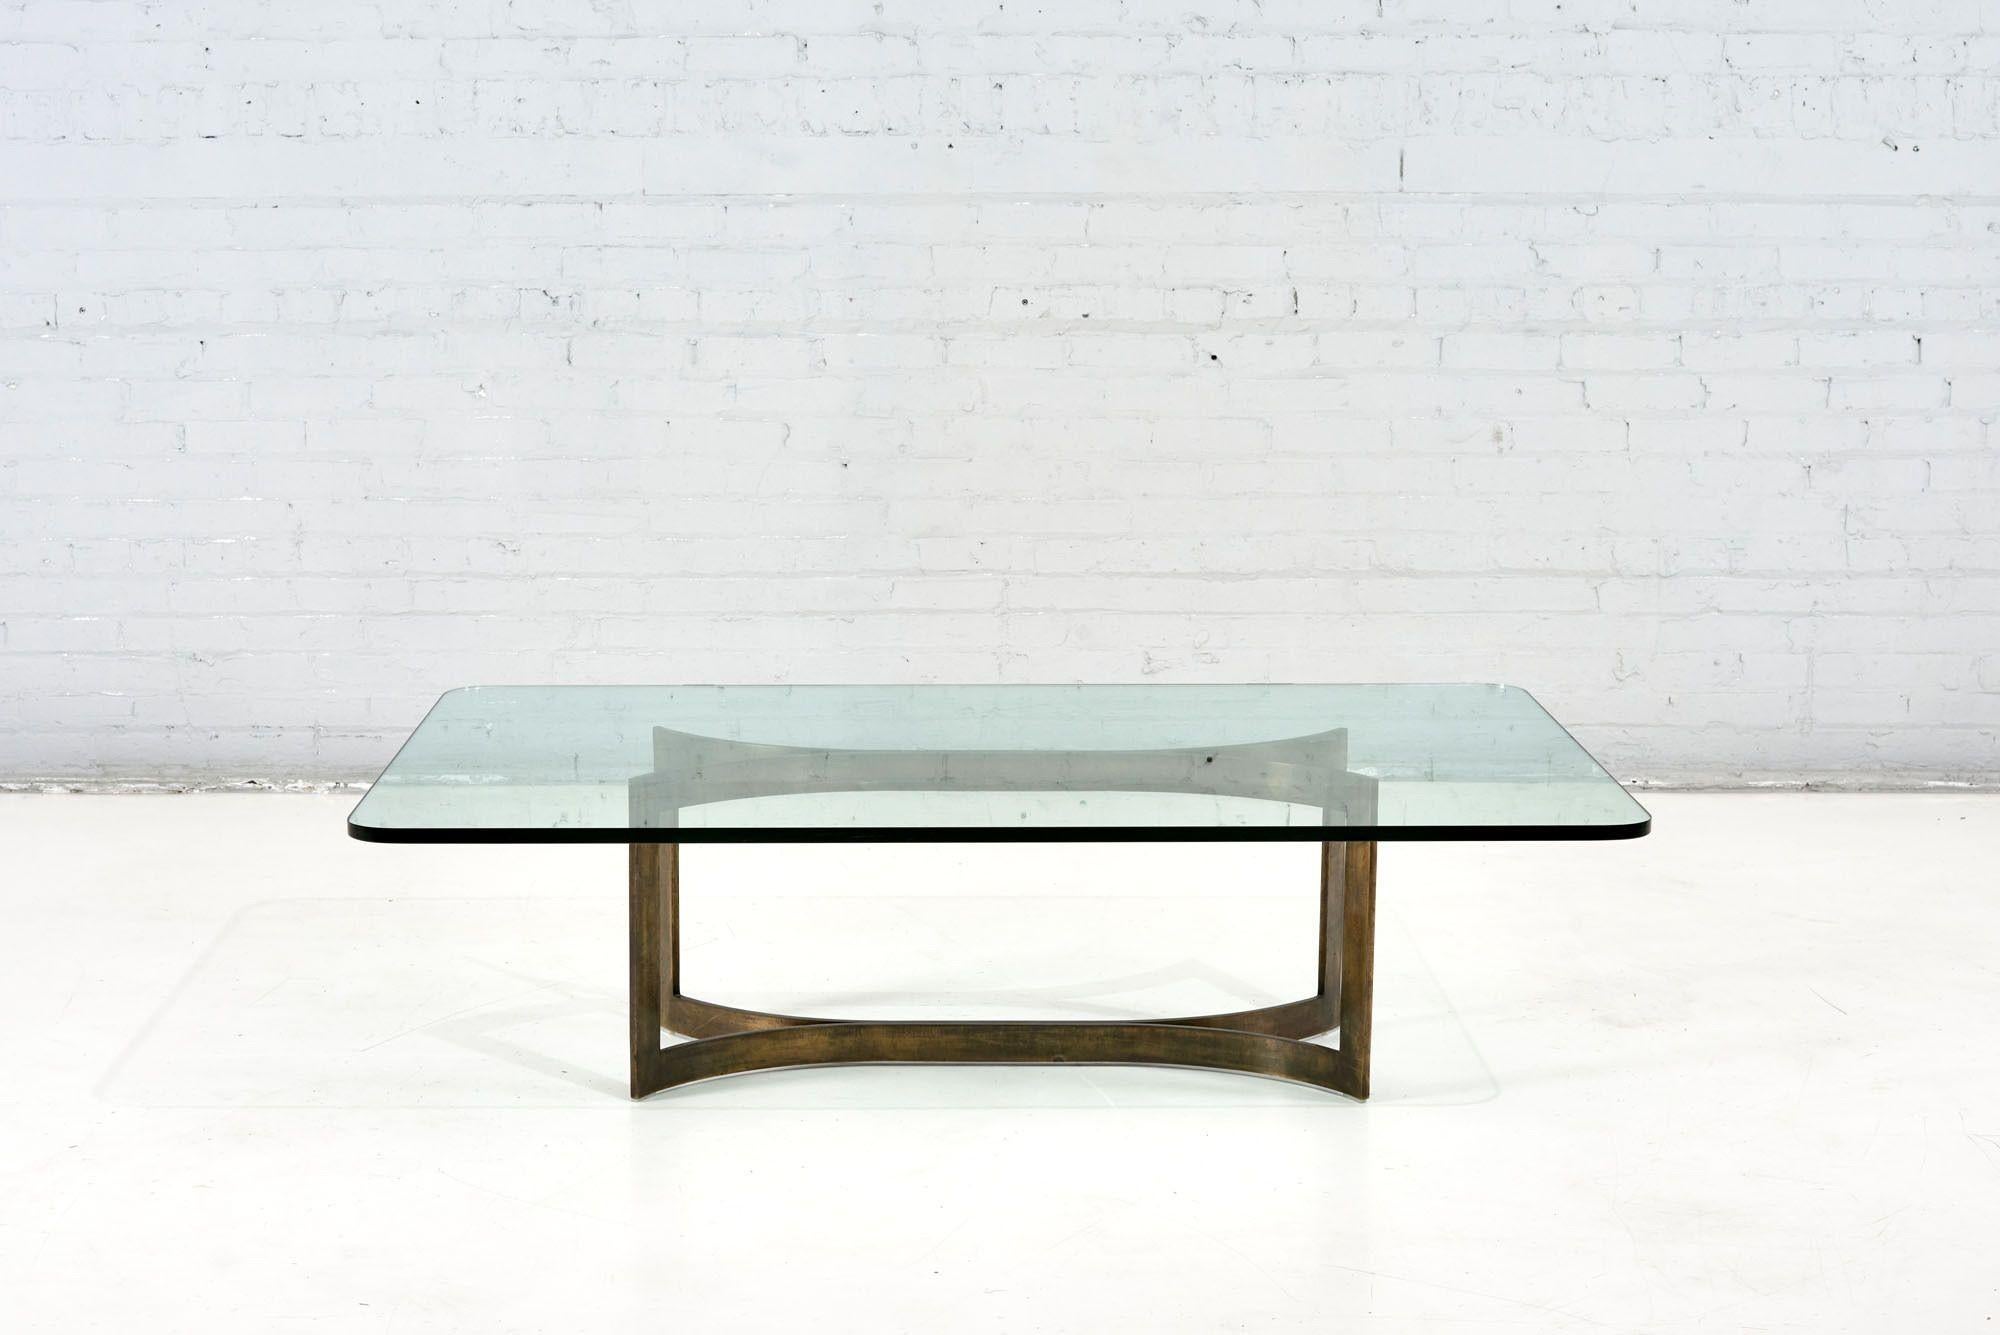 Bronze and glass sculptural coffee table, 1960. In the style of Pace. Original.